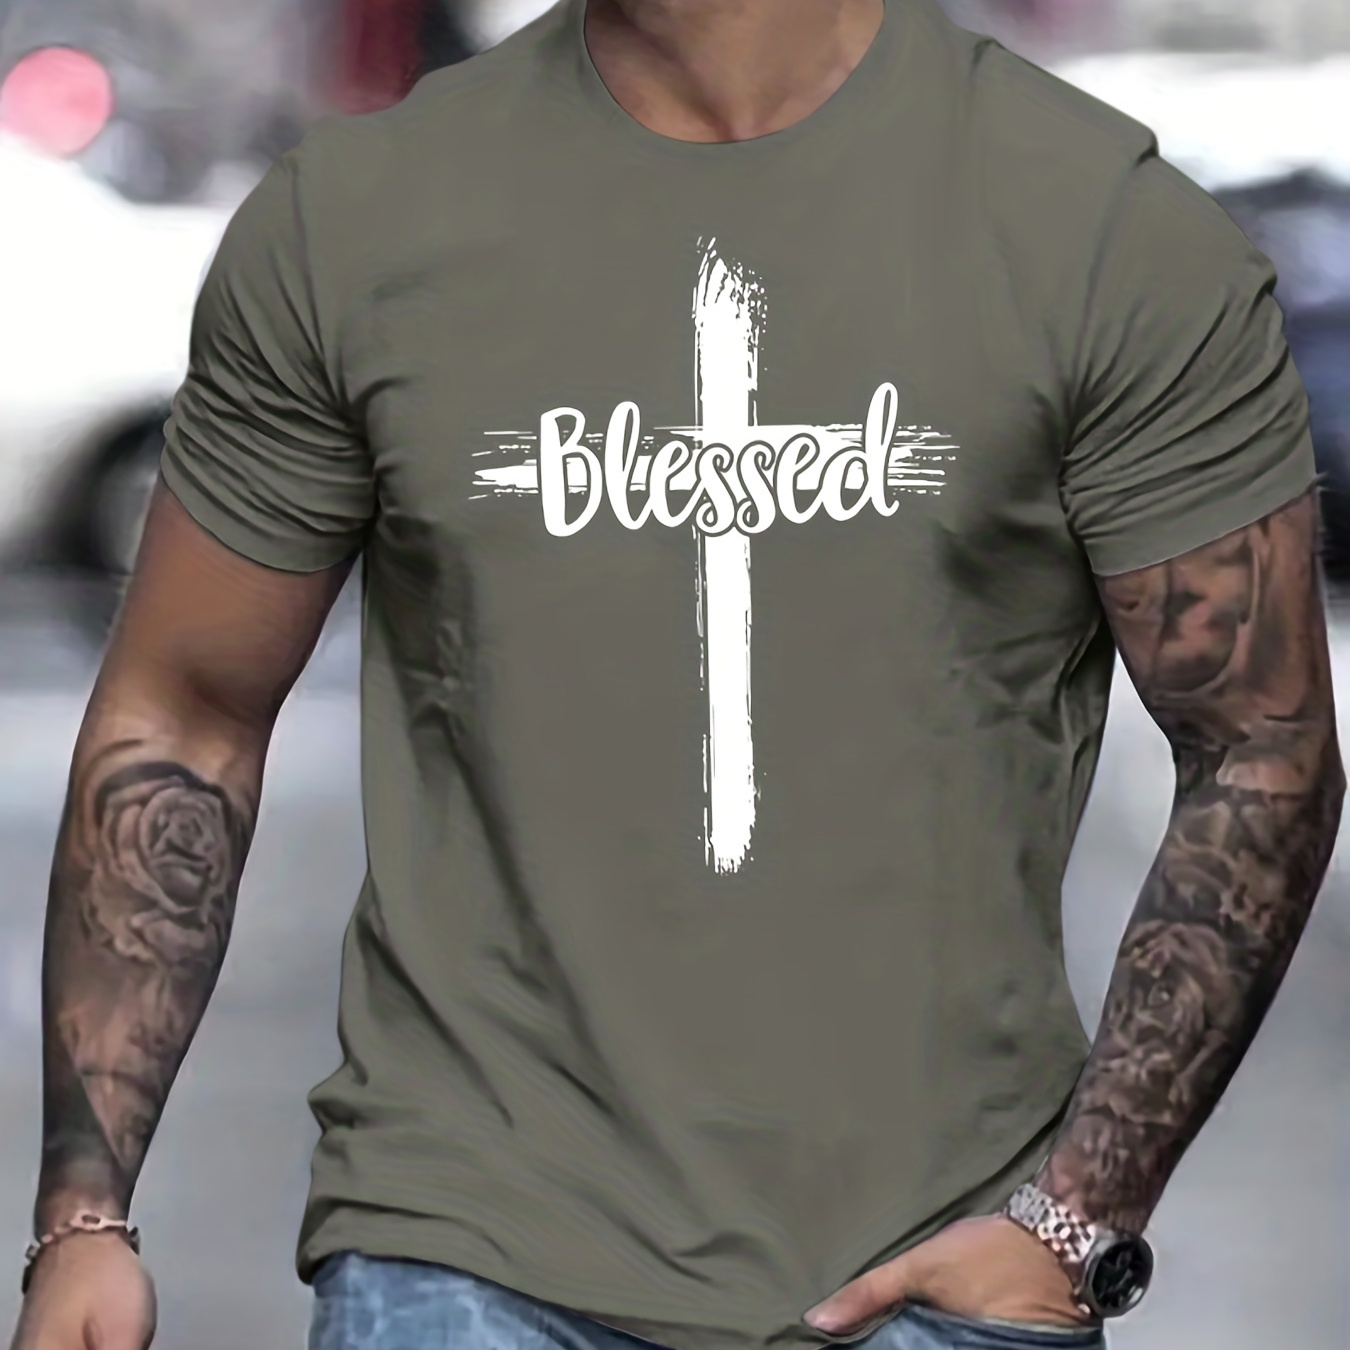 

Cross & Letter "blessed" Pattern Print Men's Comfy T-shirt, Graphic Tee Men's Summer Outdoor Clothes, Men's Clothing, Tops For Men